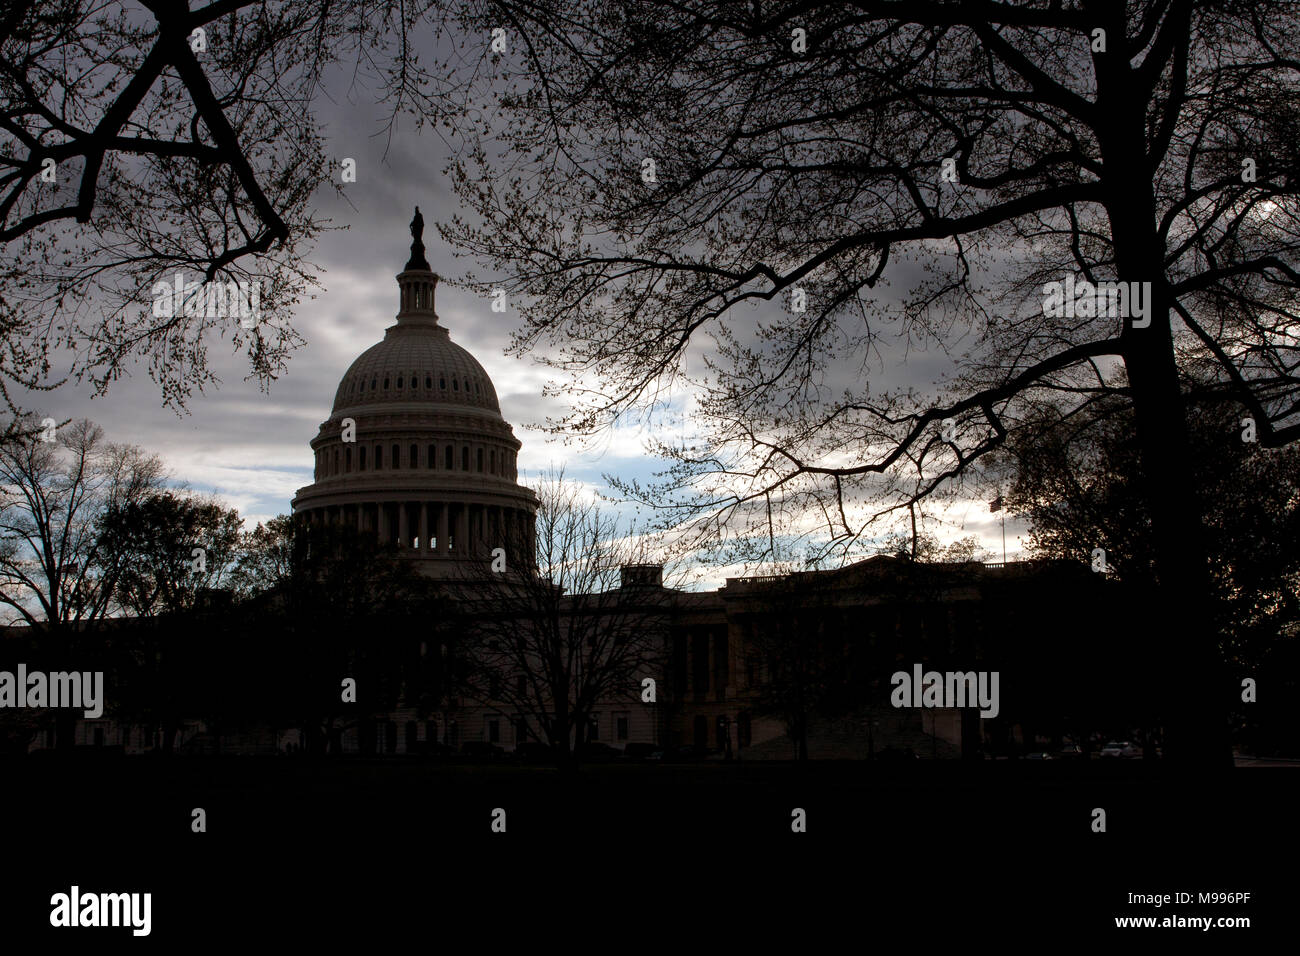 The United States Capitol building in Washington, D.C. Stock Photo